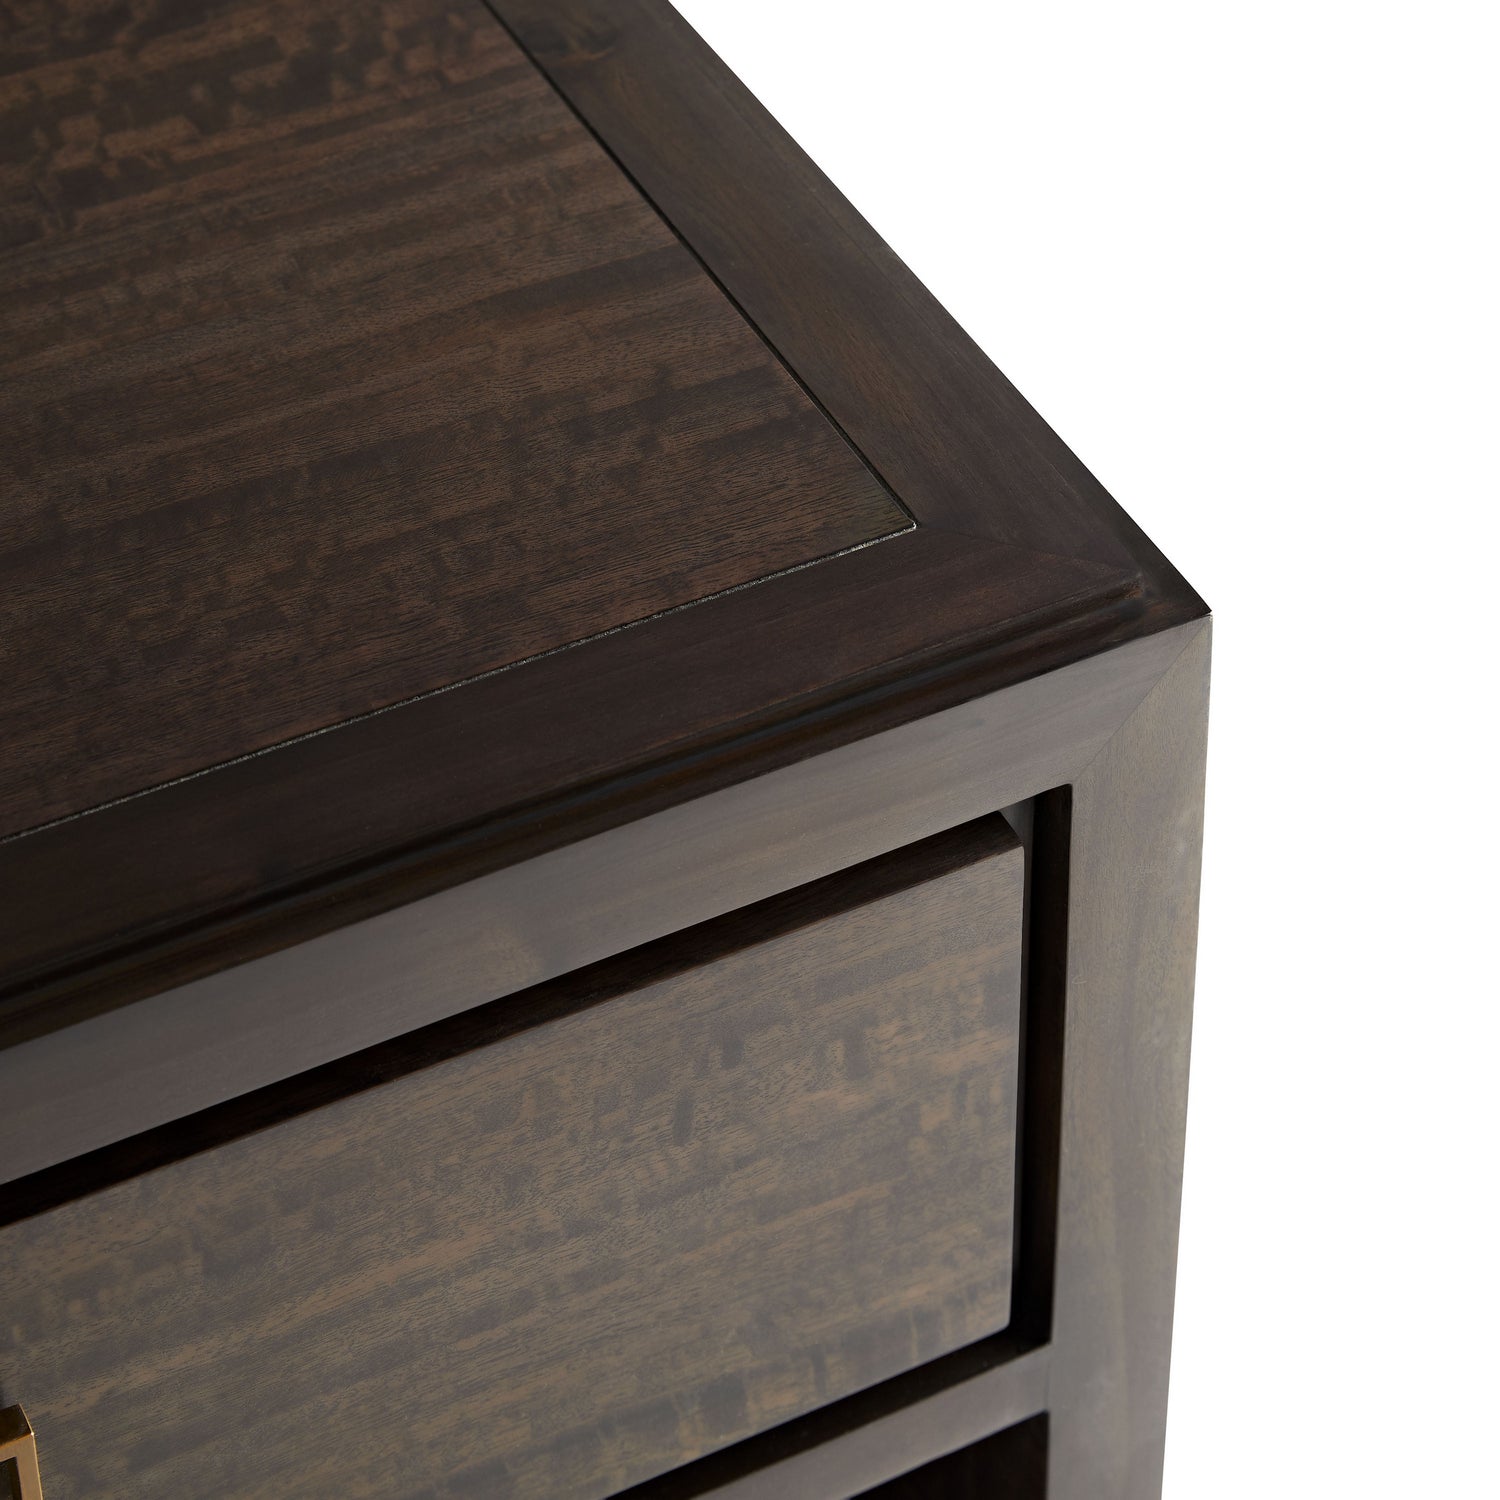 End Table from the Ethan collection in Brindle finish